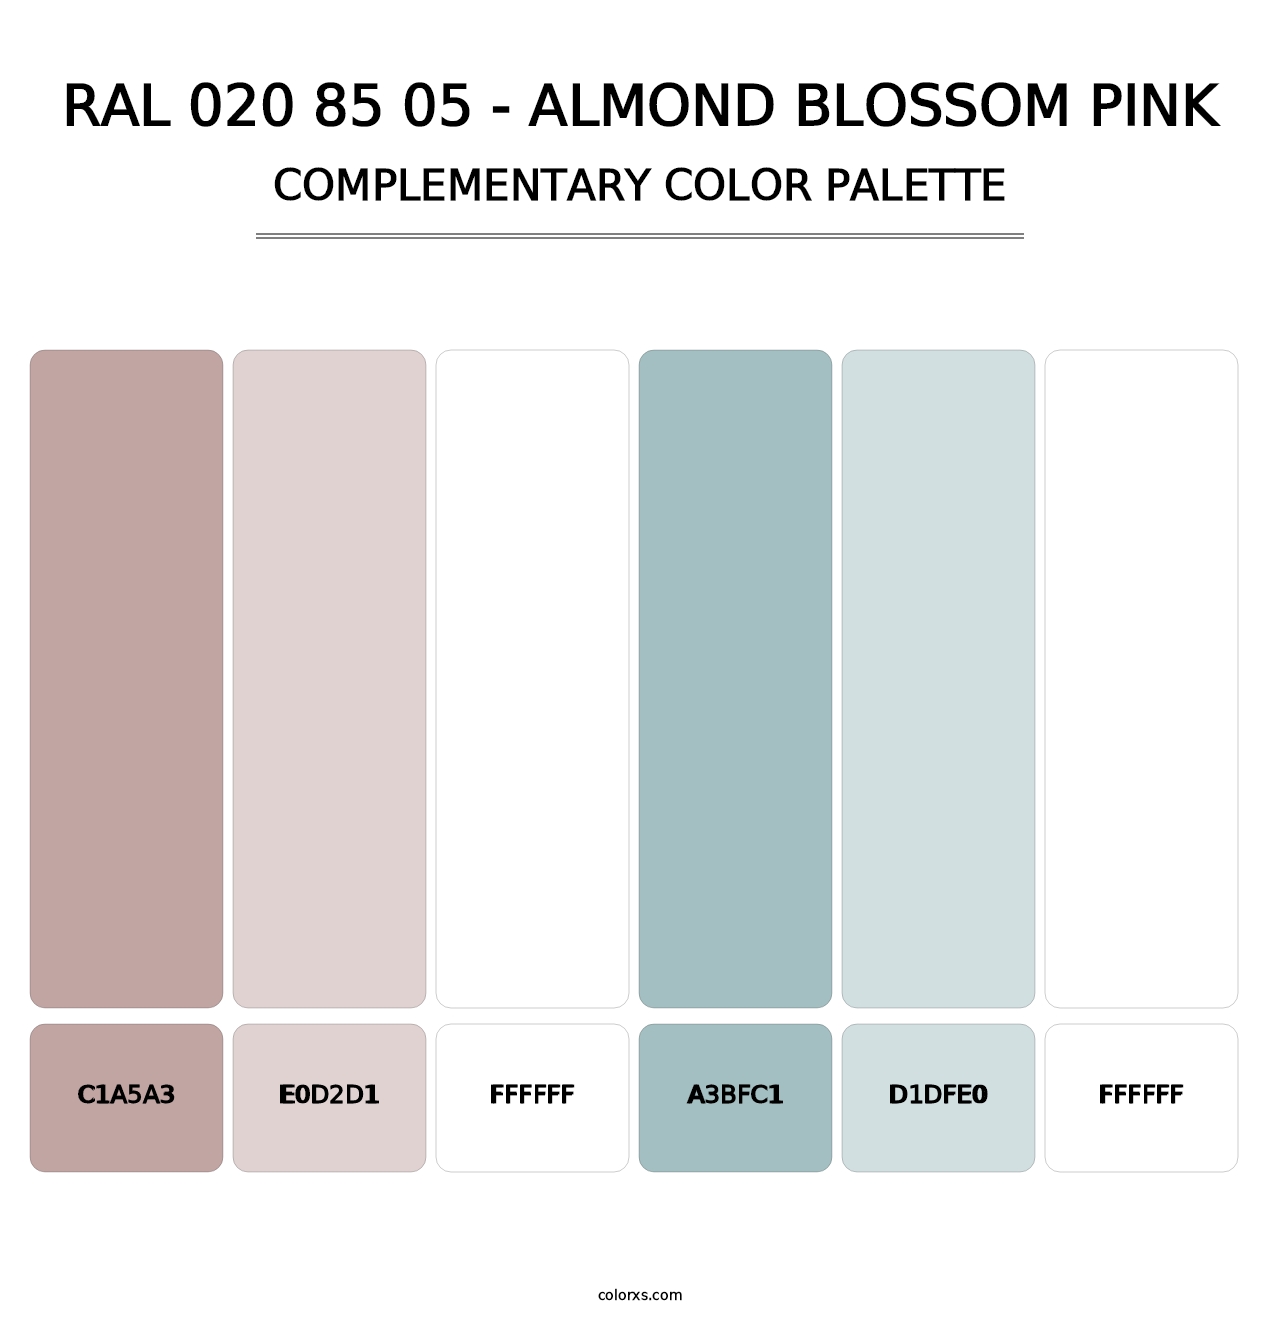 RAL 020 85 05 - Almond Blossom Pink - Complementary Color Palette